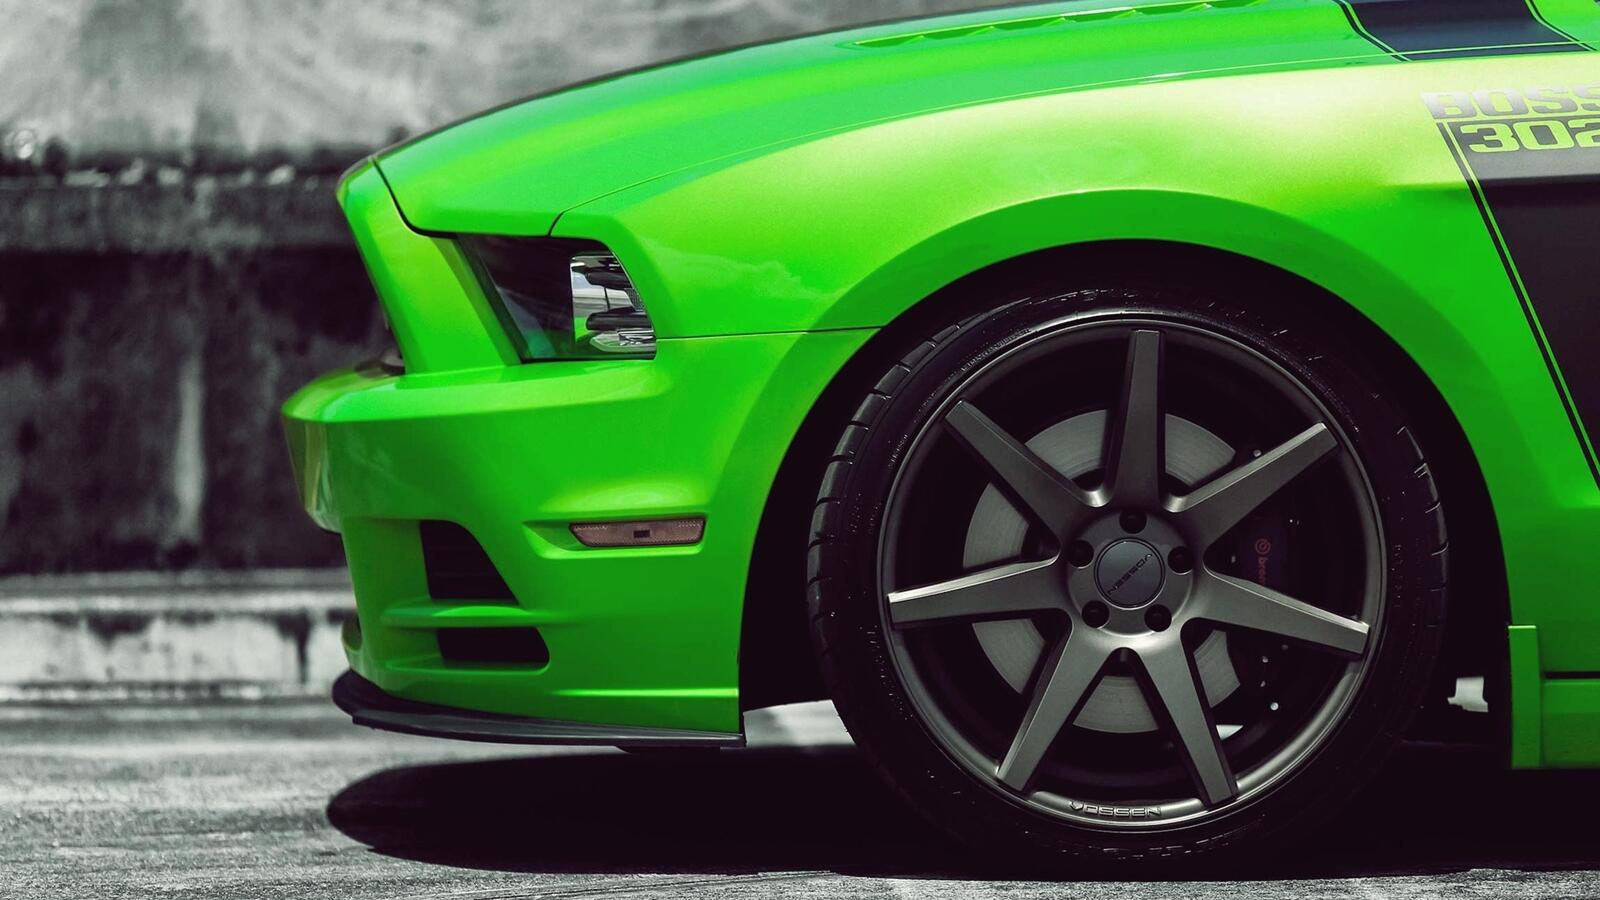 Wallpapers Ford Mustang luxury vehicle bumper on the desktop